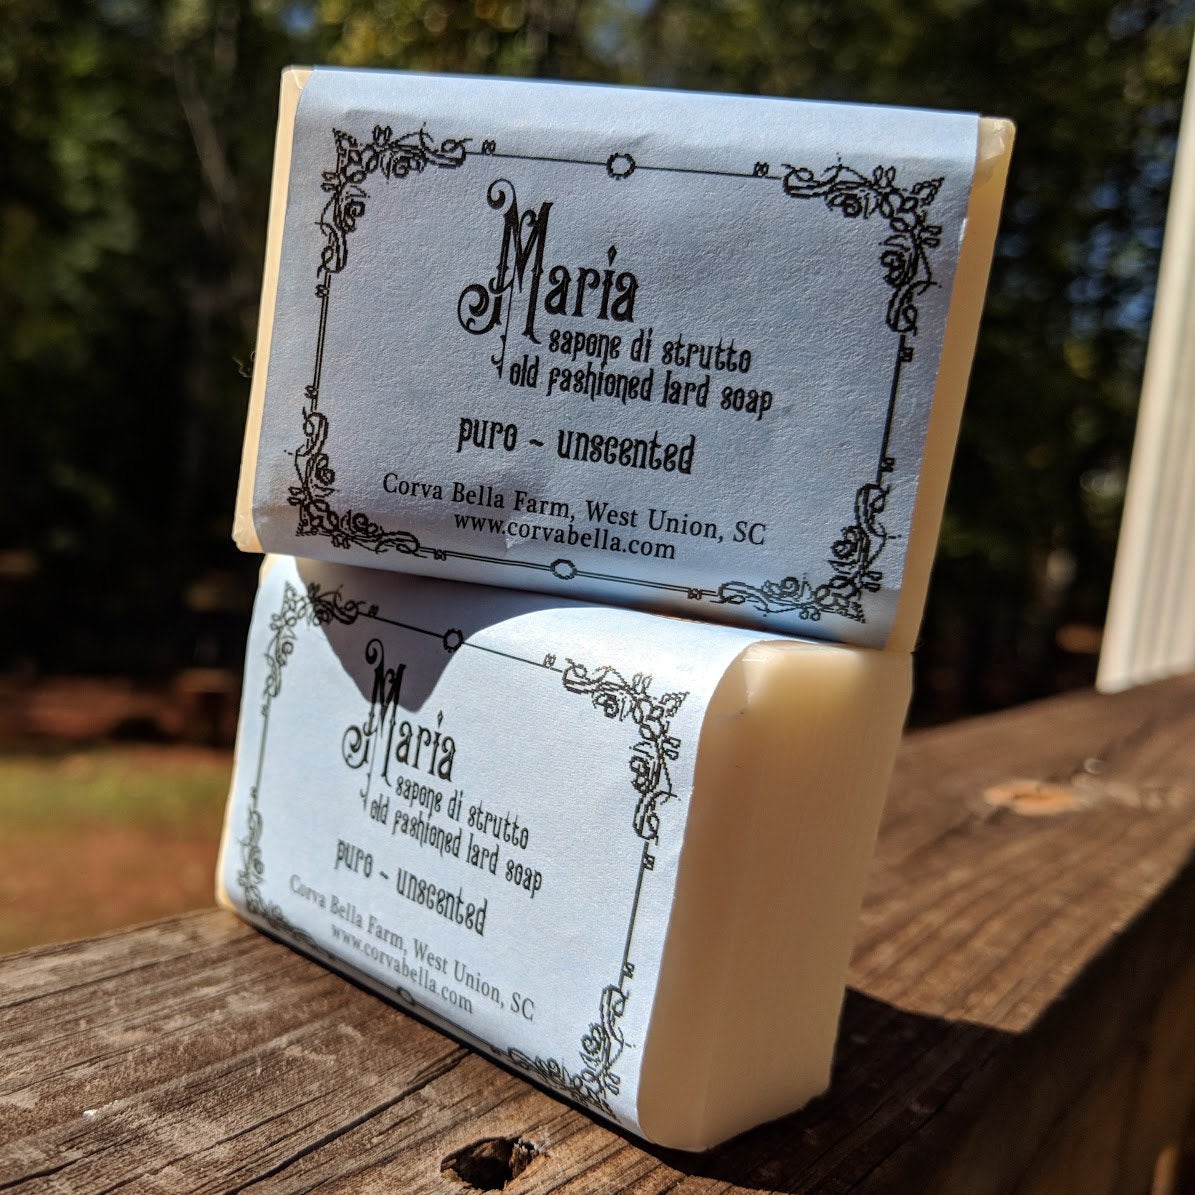 MARIA lard soap - Pure & unscented (FULL SIZE BARS, SAMPLES AVAILABLE)